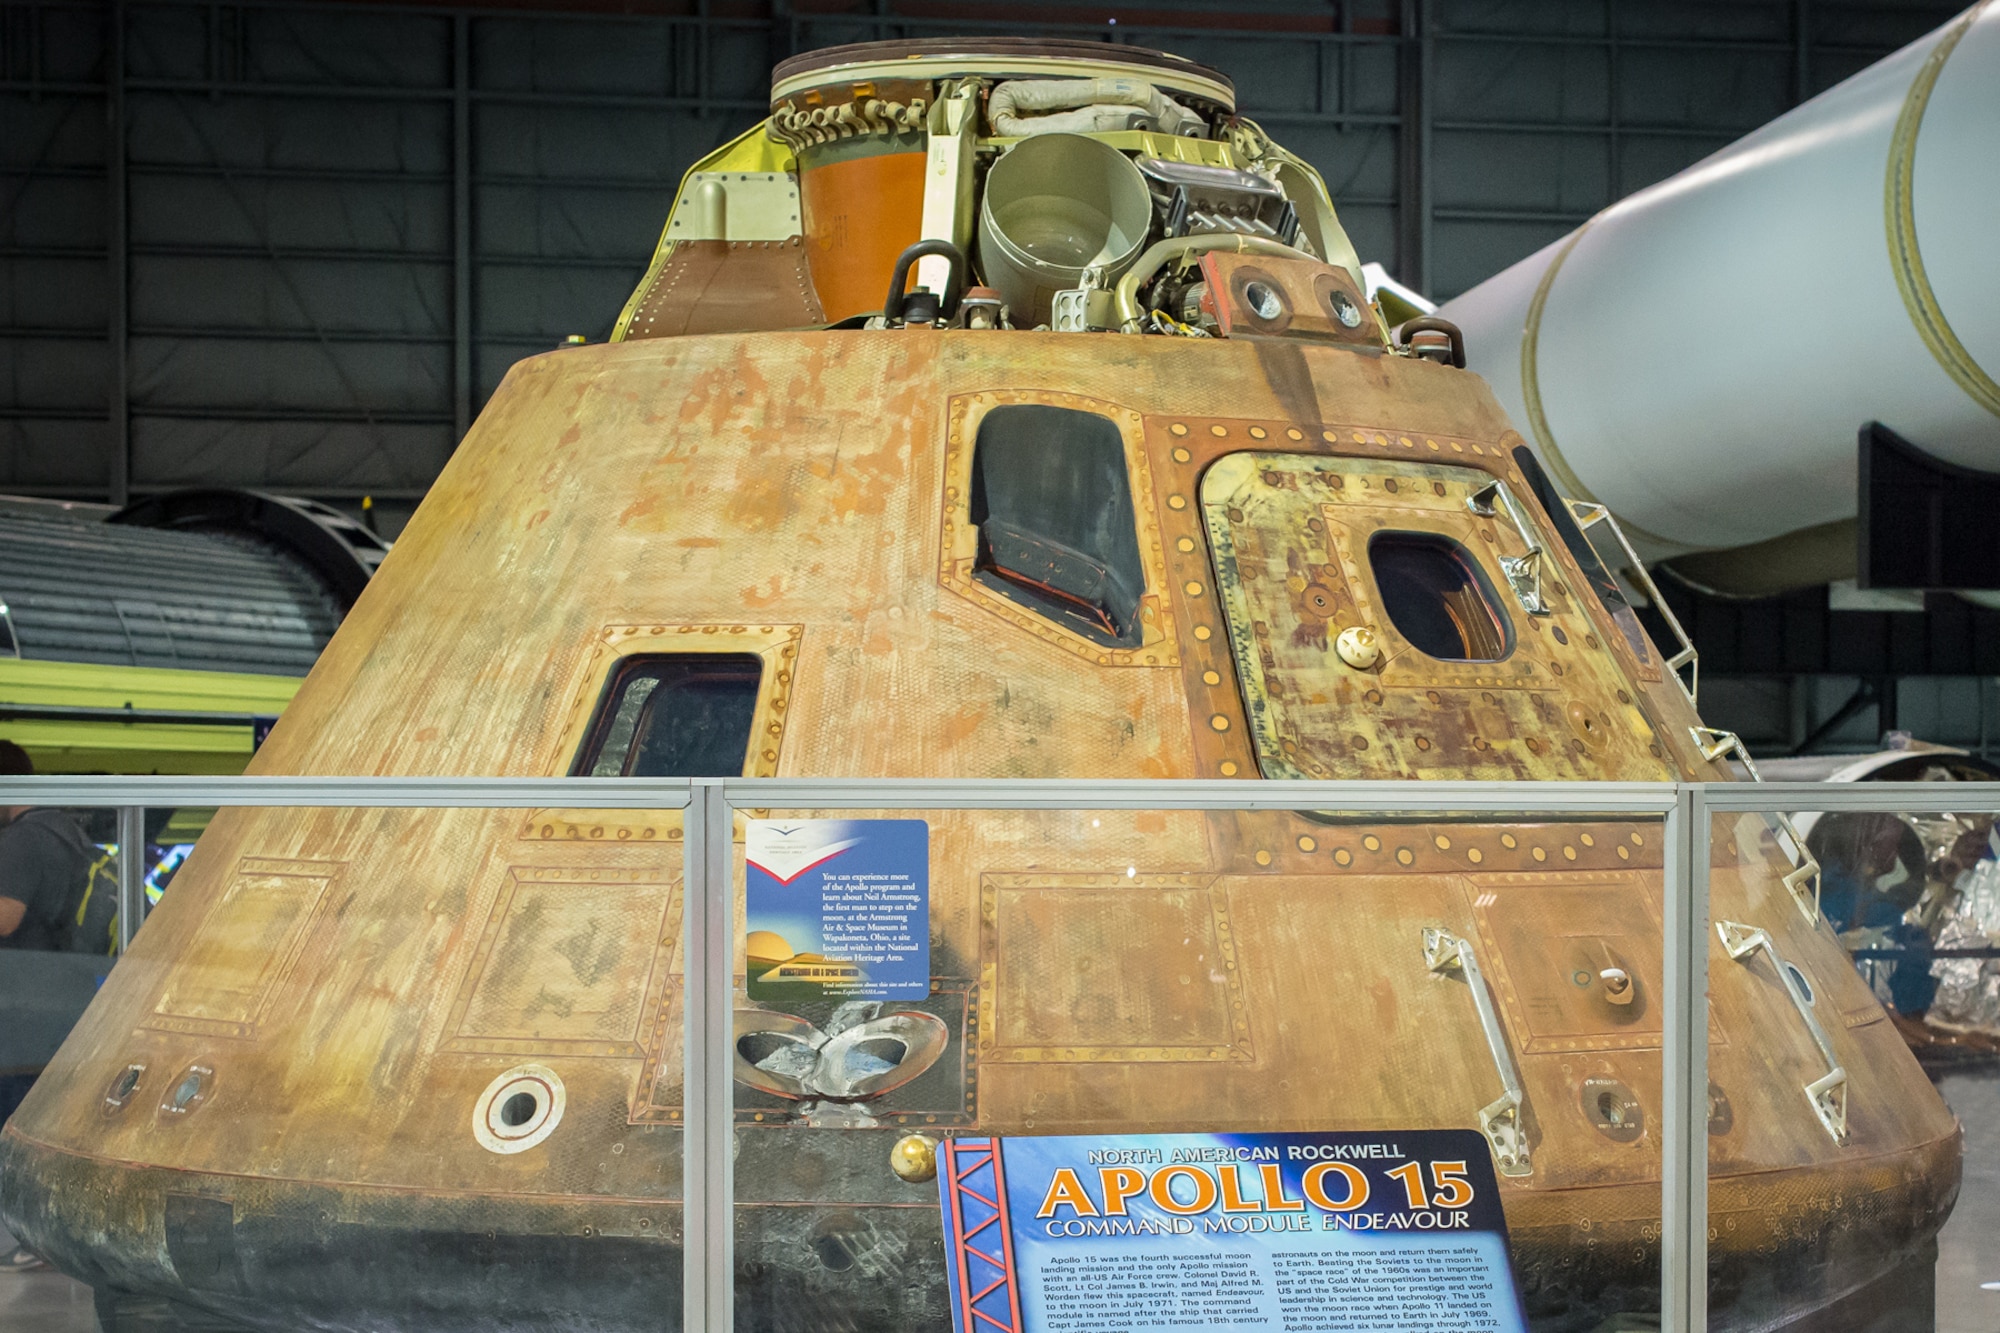 DAYTON, Ohio -- Apollo 15 Command Module on display in the Space Gallery at the National Museum of the United States Air Force. (U.S. Air Force photo)
